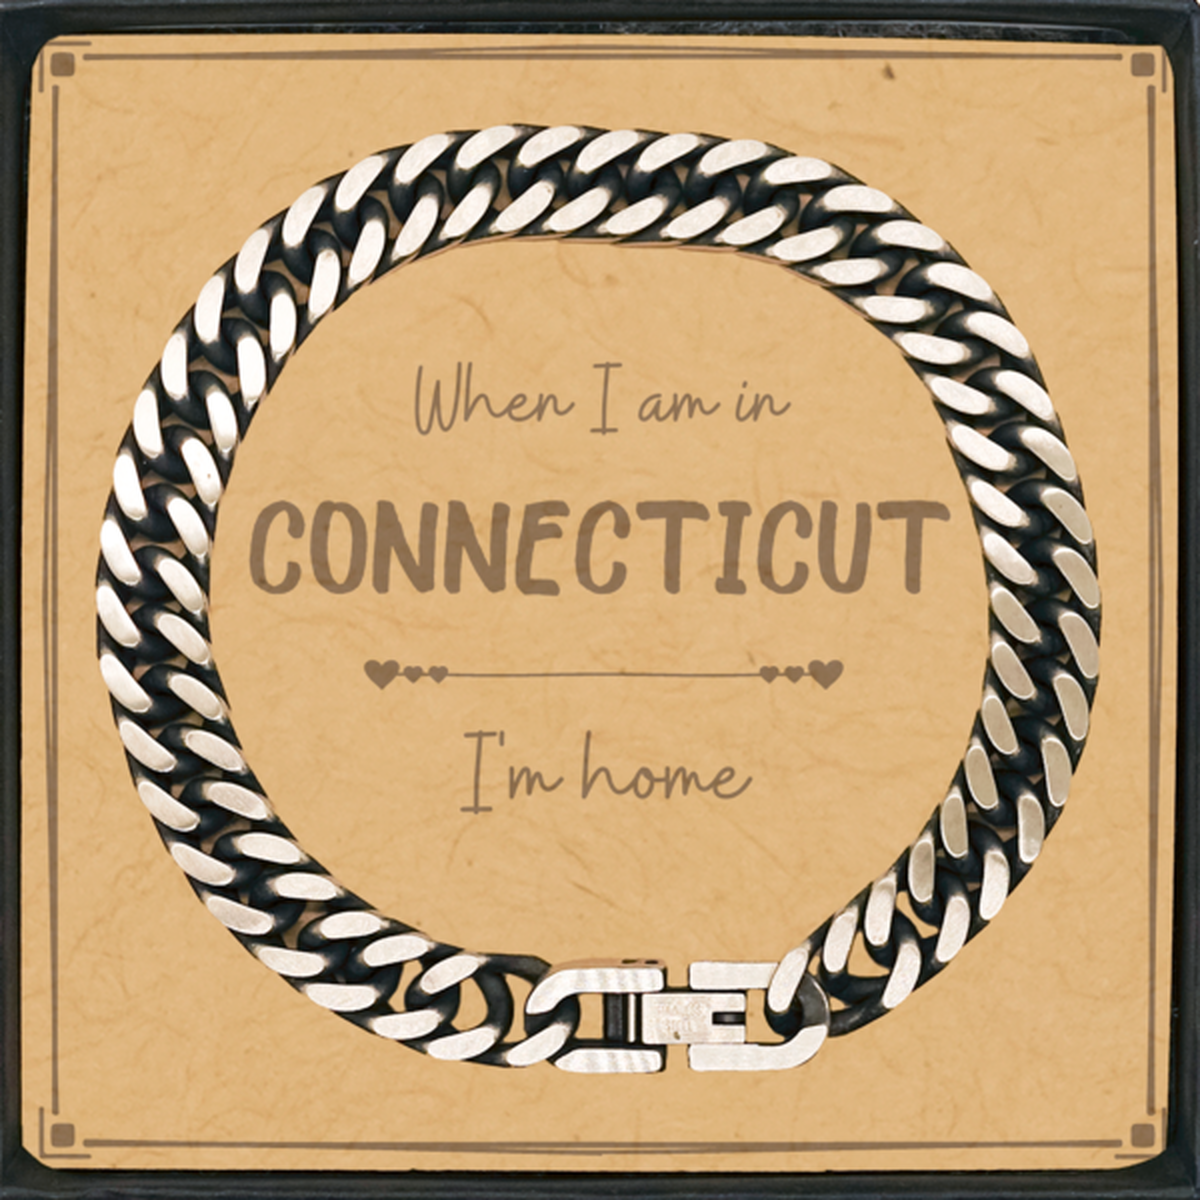 When I am in Connecticut I'm home Cuban Link Chain Bracelet, Message Card Gifts For Connecticut, State Connecticut Birthday Gifts for Friends Coworker